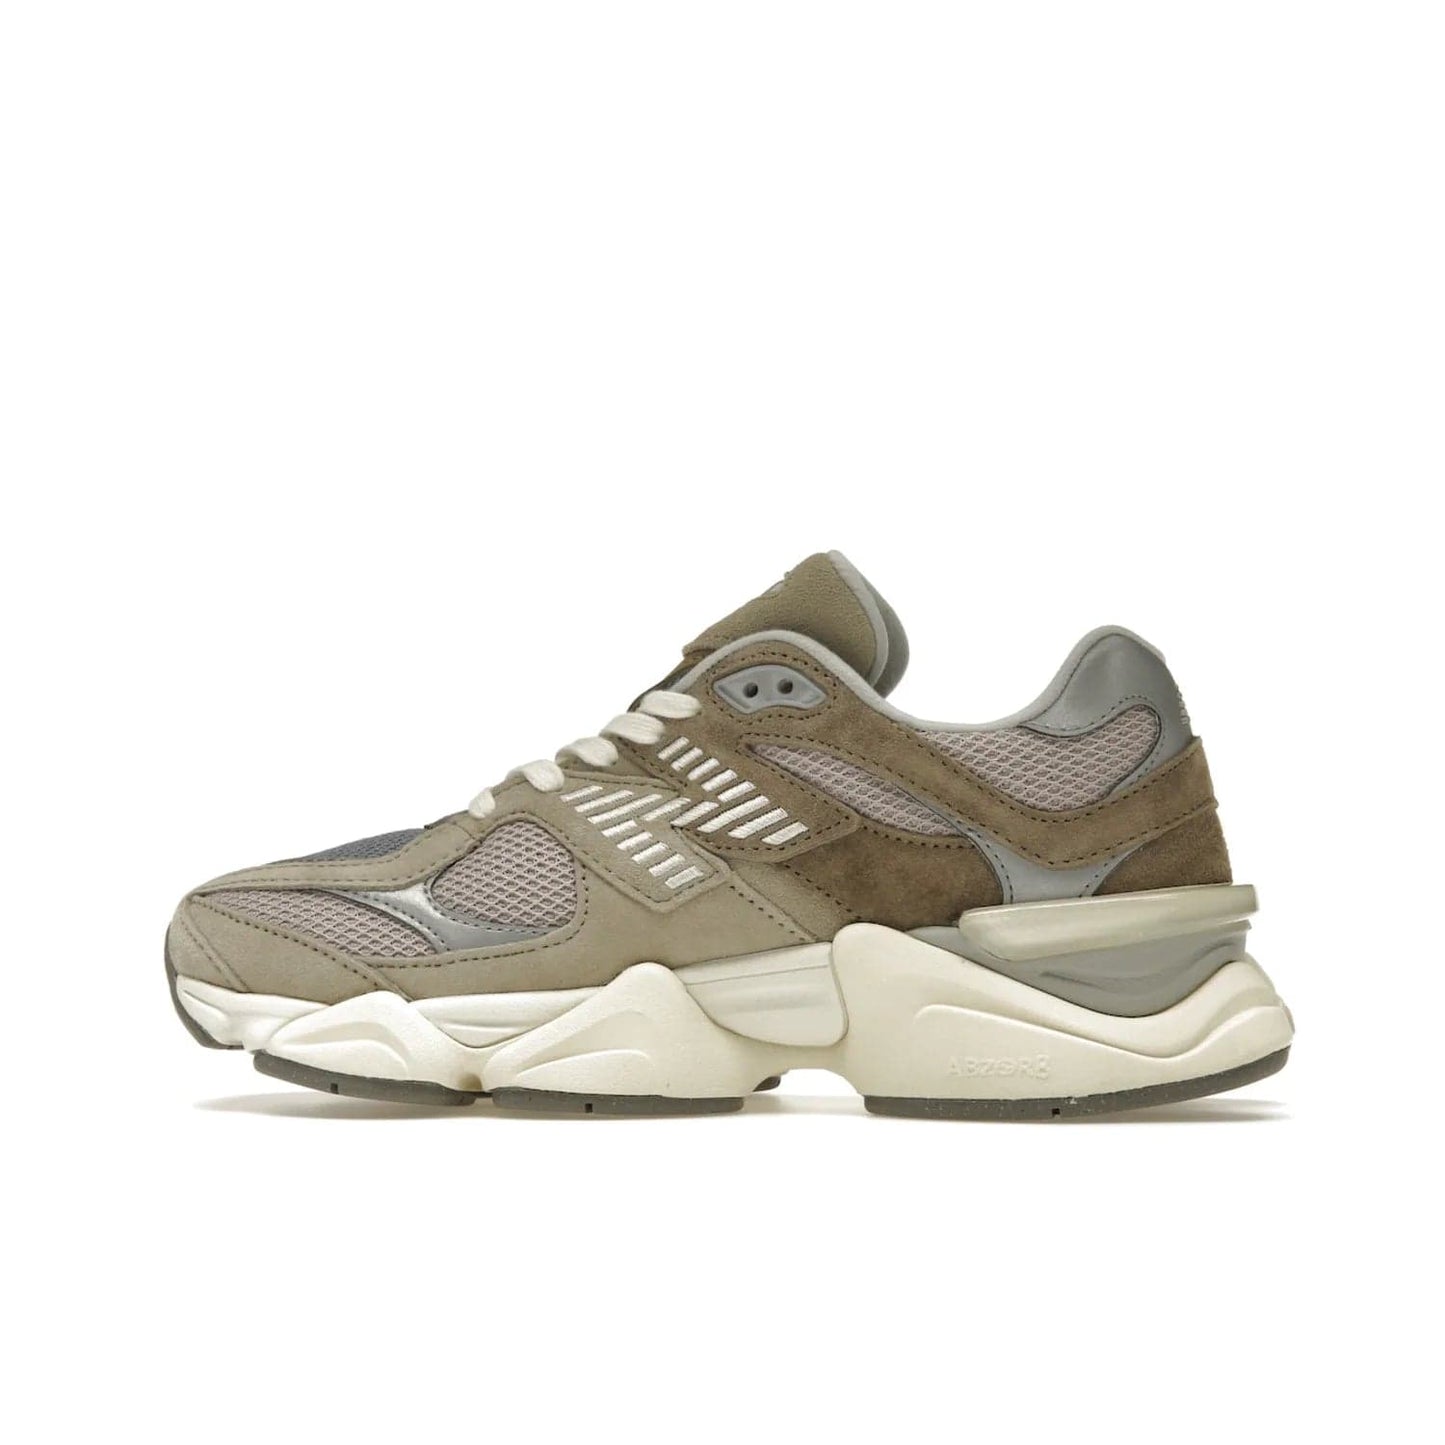 New Balance 9060 Mushroom - Image 20 - Only at www.BallersClubKickz.com - Get the New Balance 9060 Mushroom in stylish aluminum and mushroom tones. Featuring a porous mesh fabric with multiple suede overlays, a grey N symbol and rugged off-white/grey sole. Shop now and make a statement.